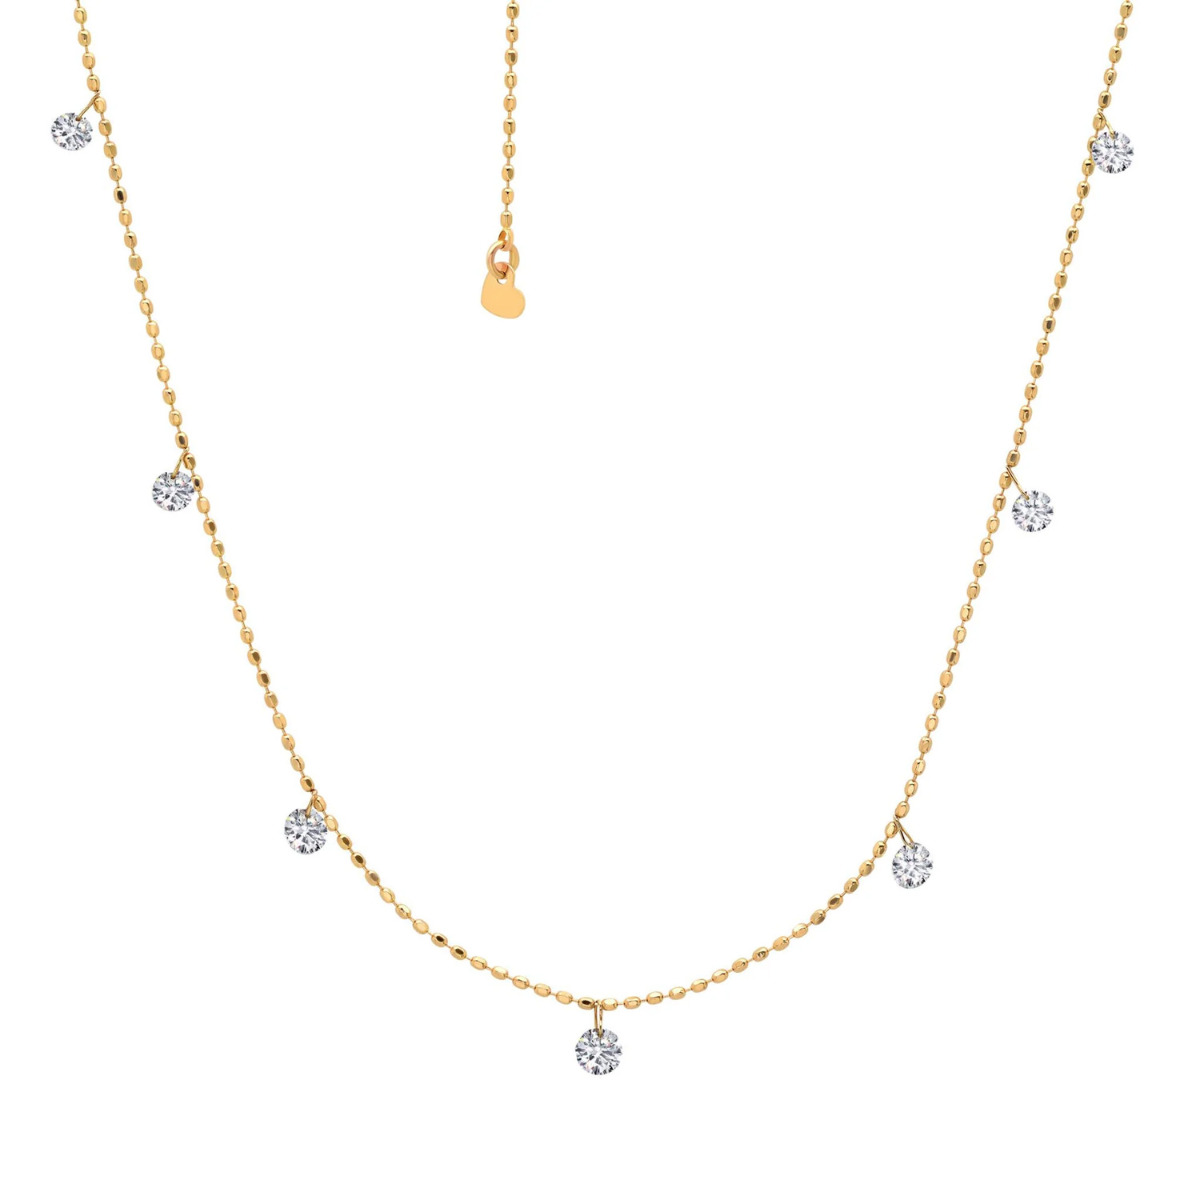 Graziela Gems Floating Diamond Tiny Necklace in 18kt Yellow Gold